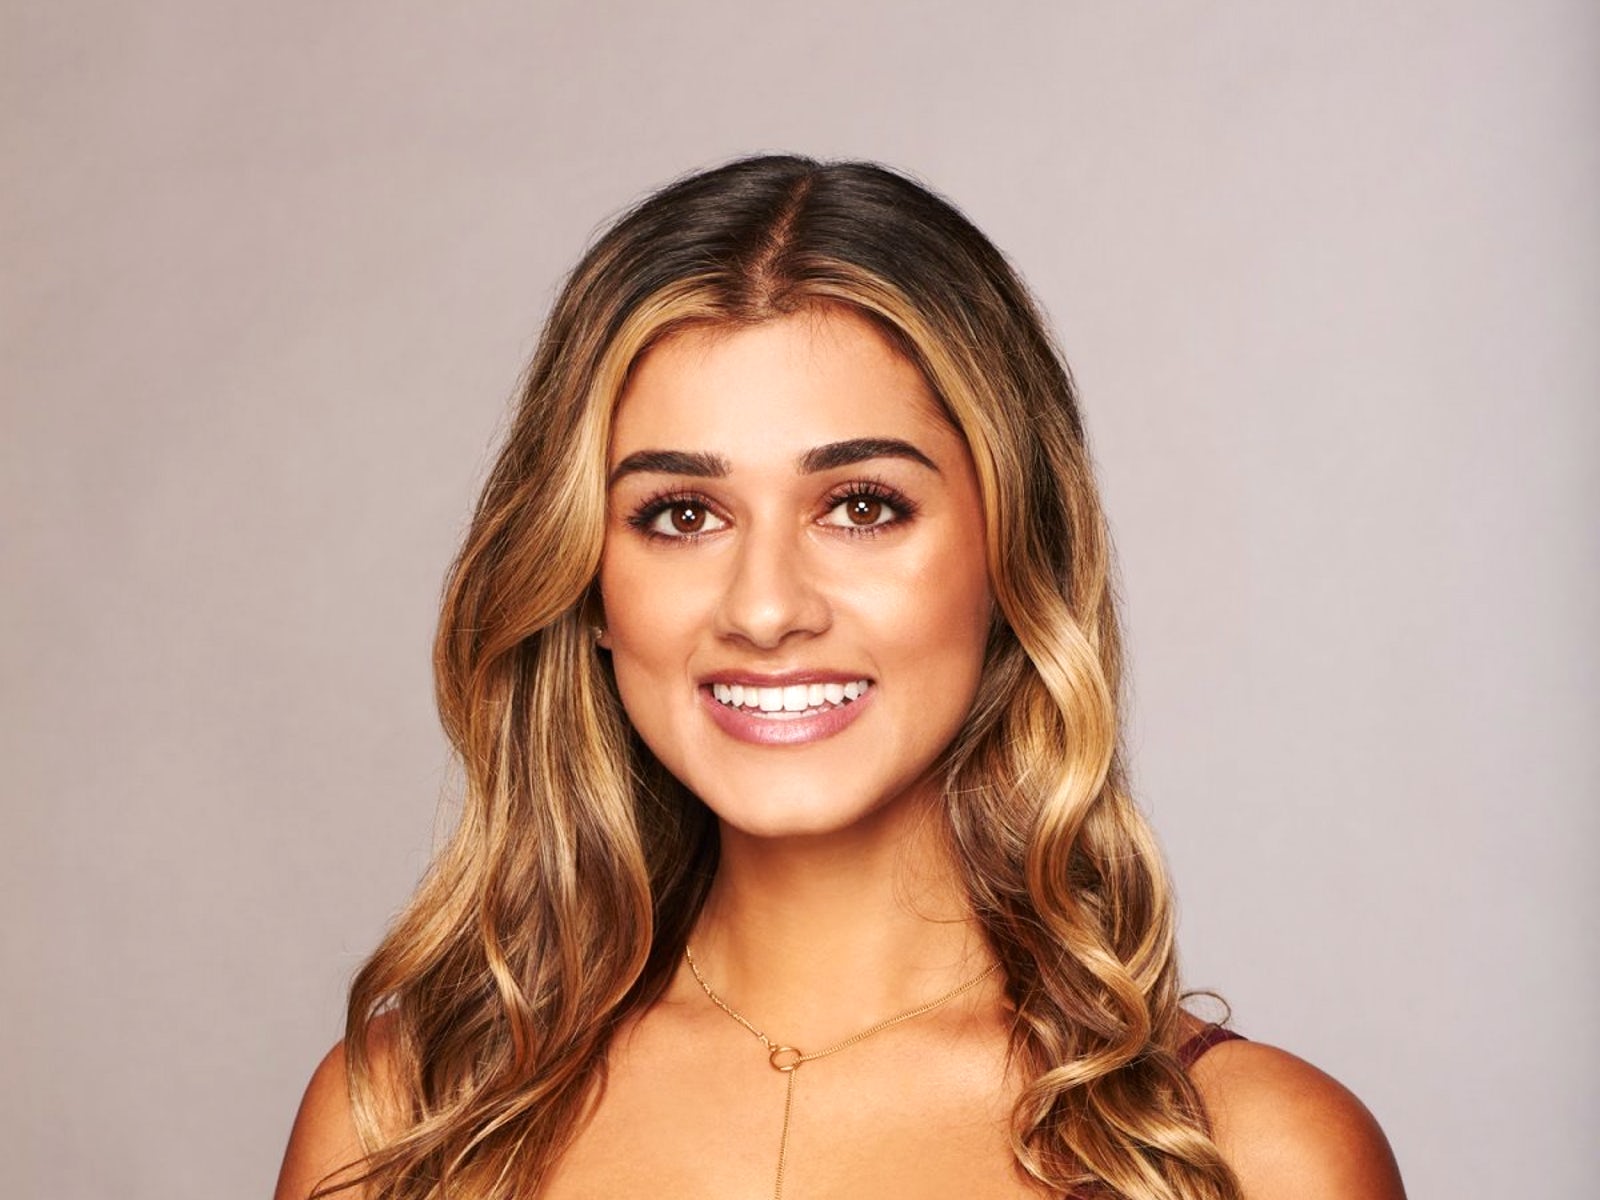 Kirpa Sudick reveals what happened to her chin on 'The Bachelor' - Reality TV World1600 x 1200